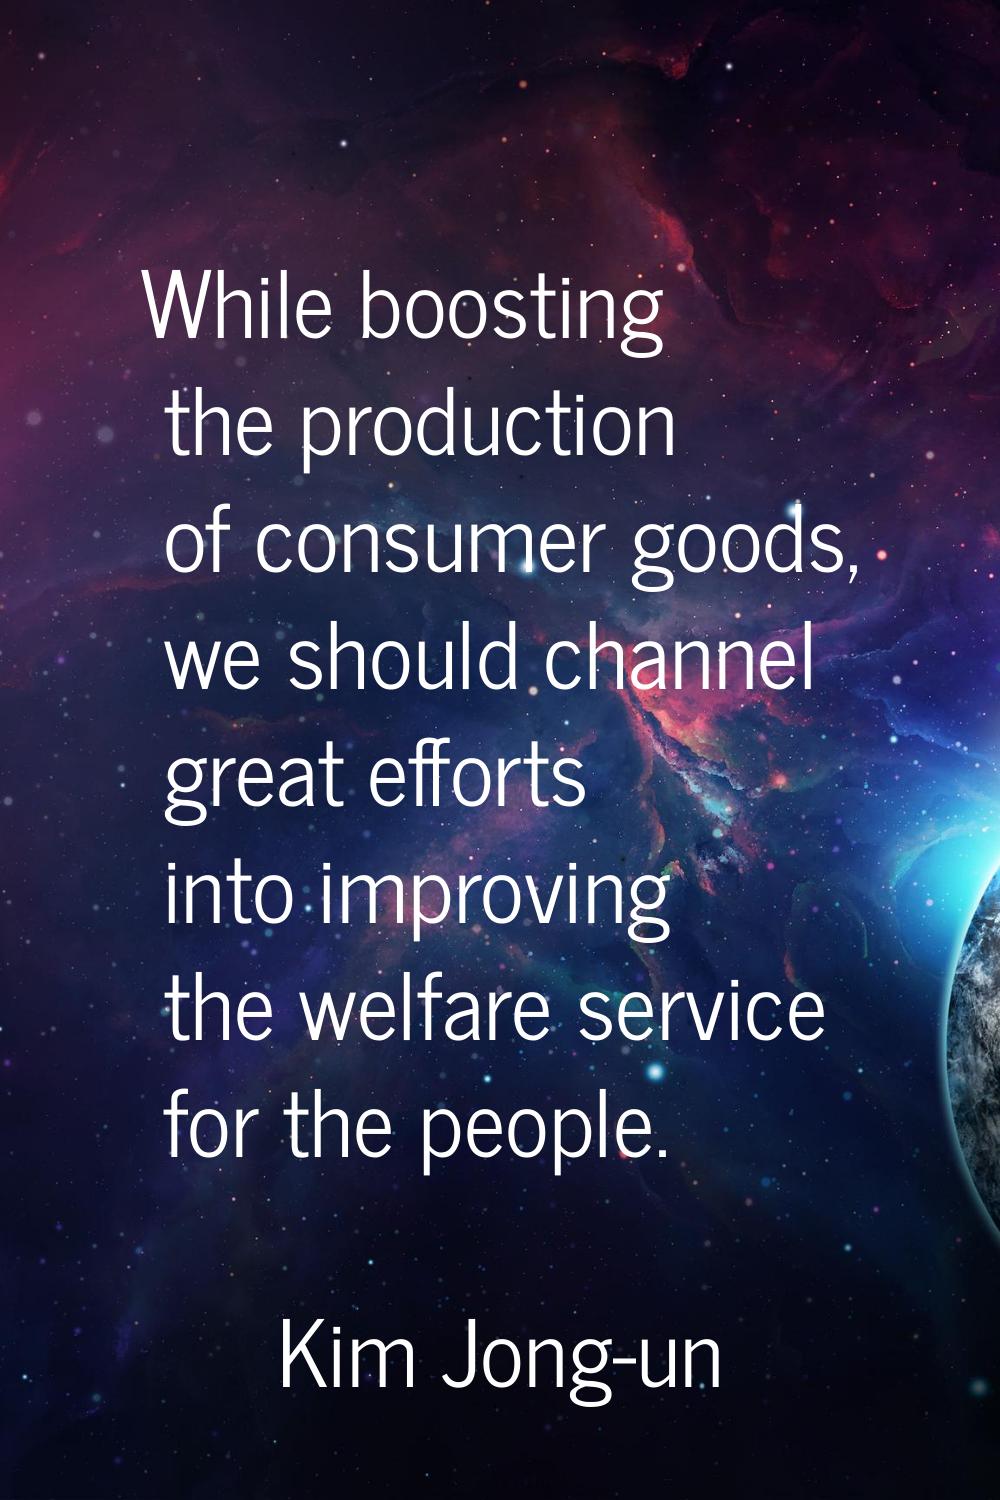 While boosting the production of consumer goods, we should channel great efforts into improving the